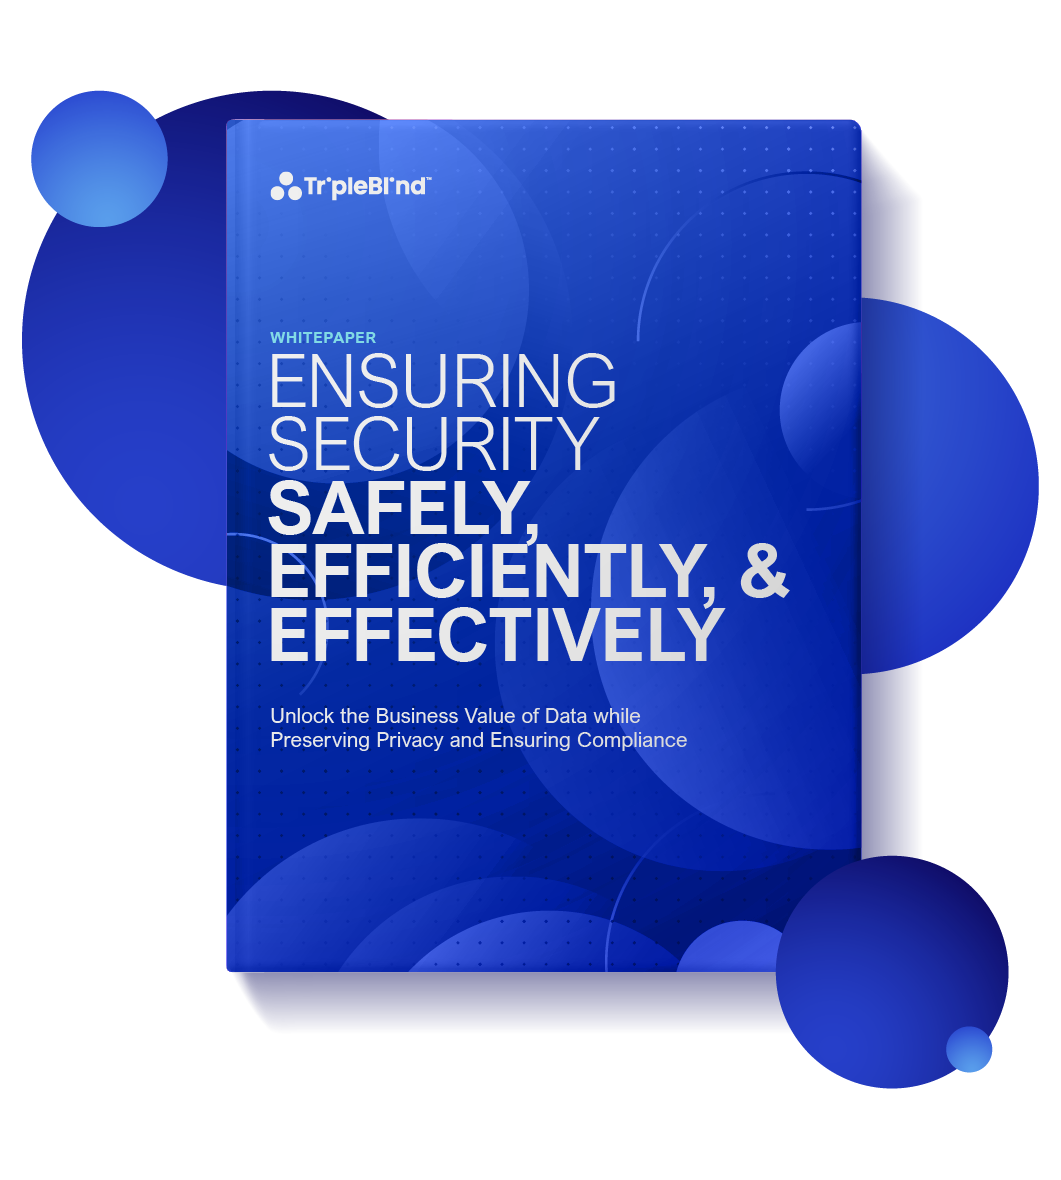 Whitepaper: Ensuring Security Safely, Efficiently, and Effectively